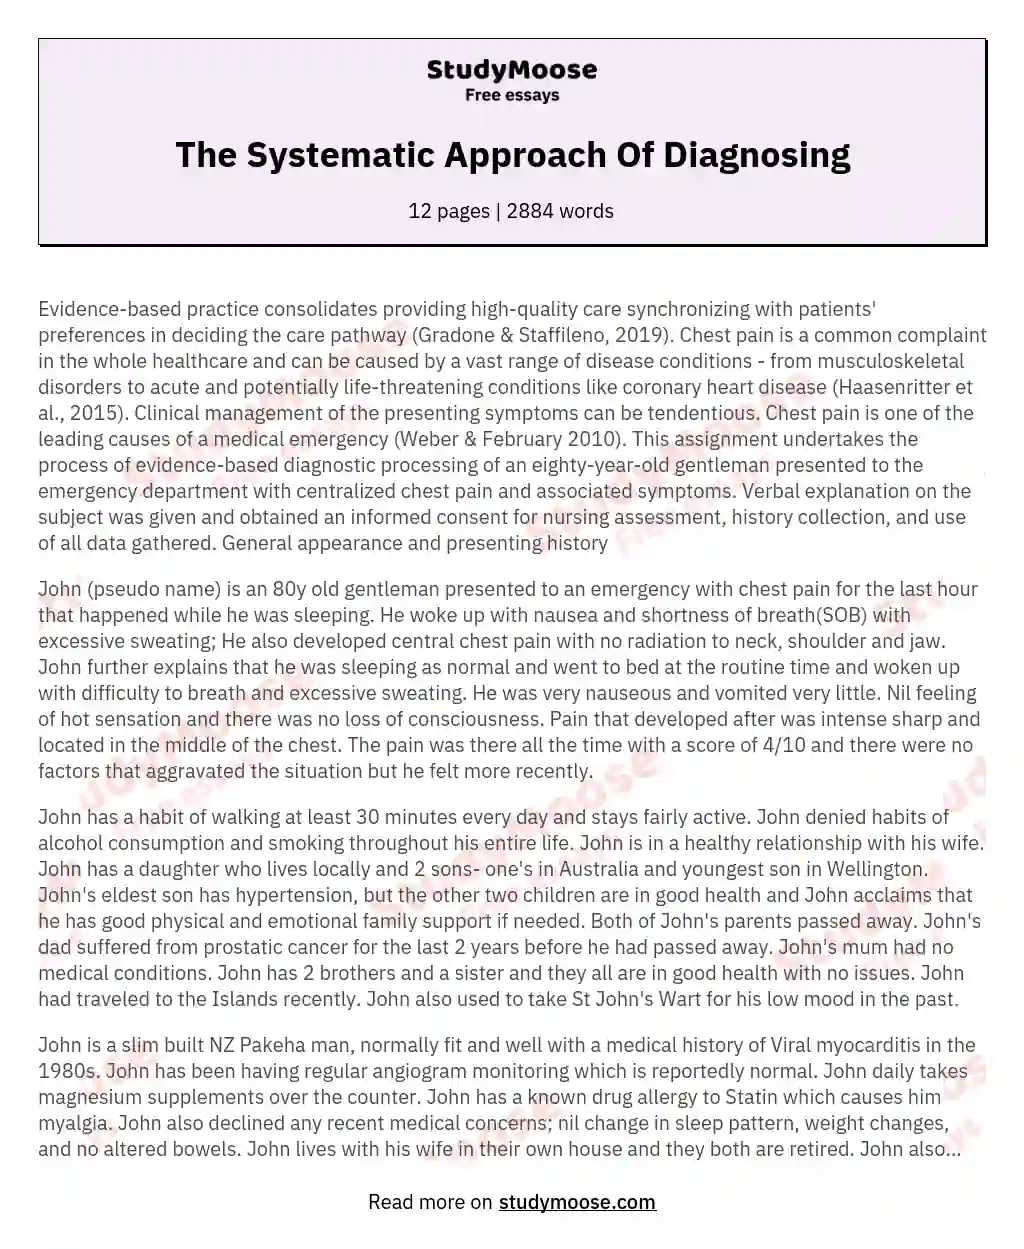 The Systematic Approach Of Diagnosing essay